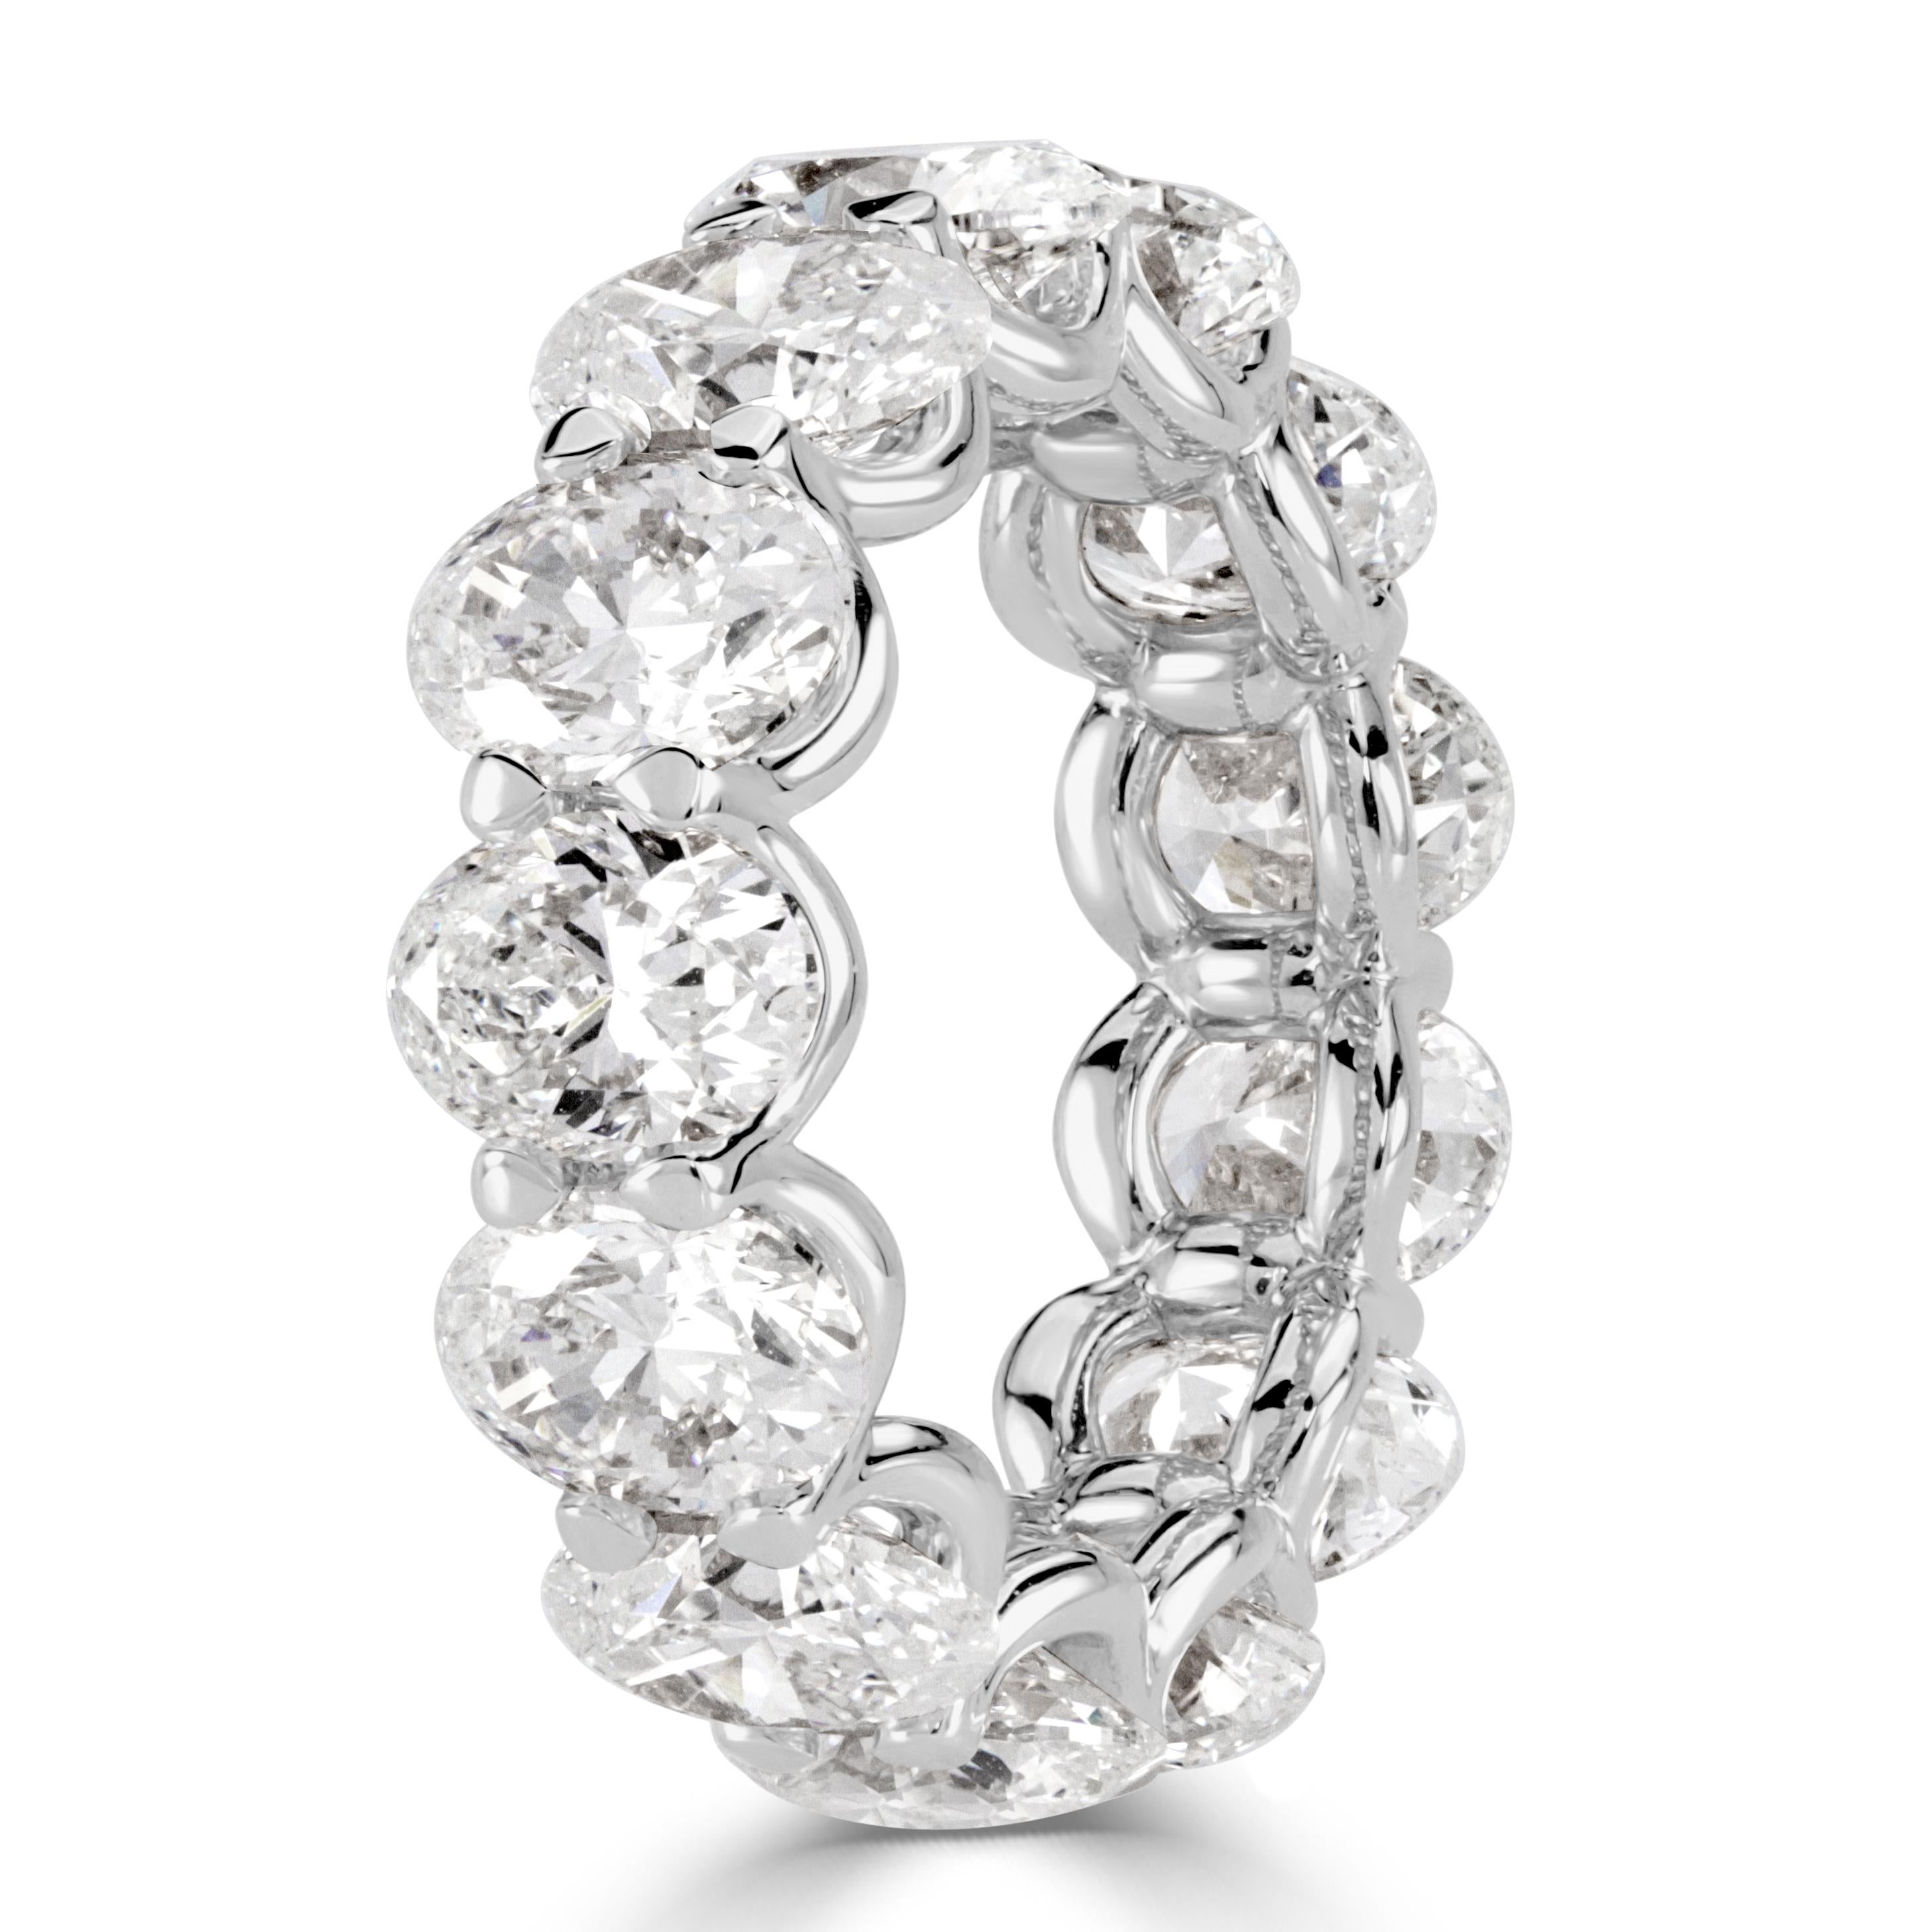 Custom created in 18k white gold, this stunning diamond eternity band showcases 9.10ct of perfectly matched oval cut diamonds GIA certified at G-H in color, VVS1-VS2 in clarity. They are set in a 